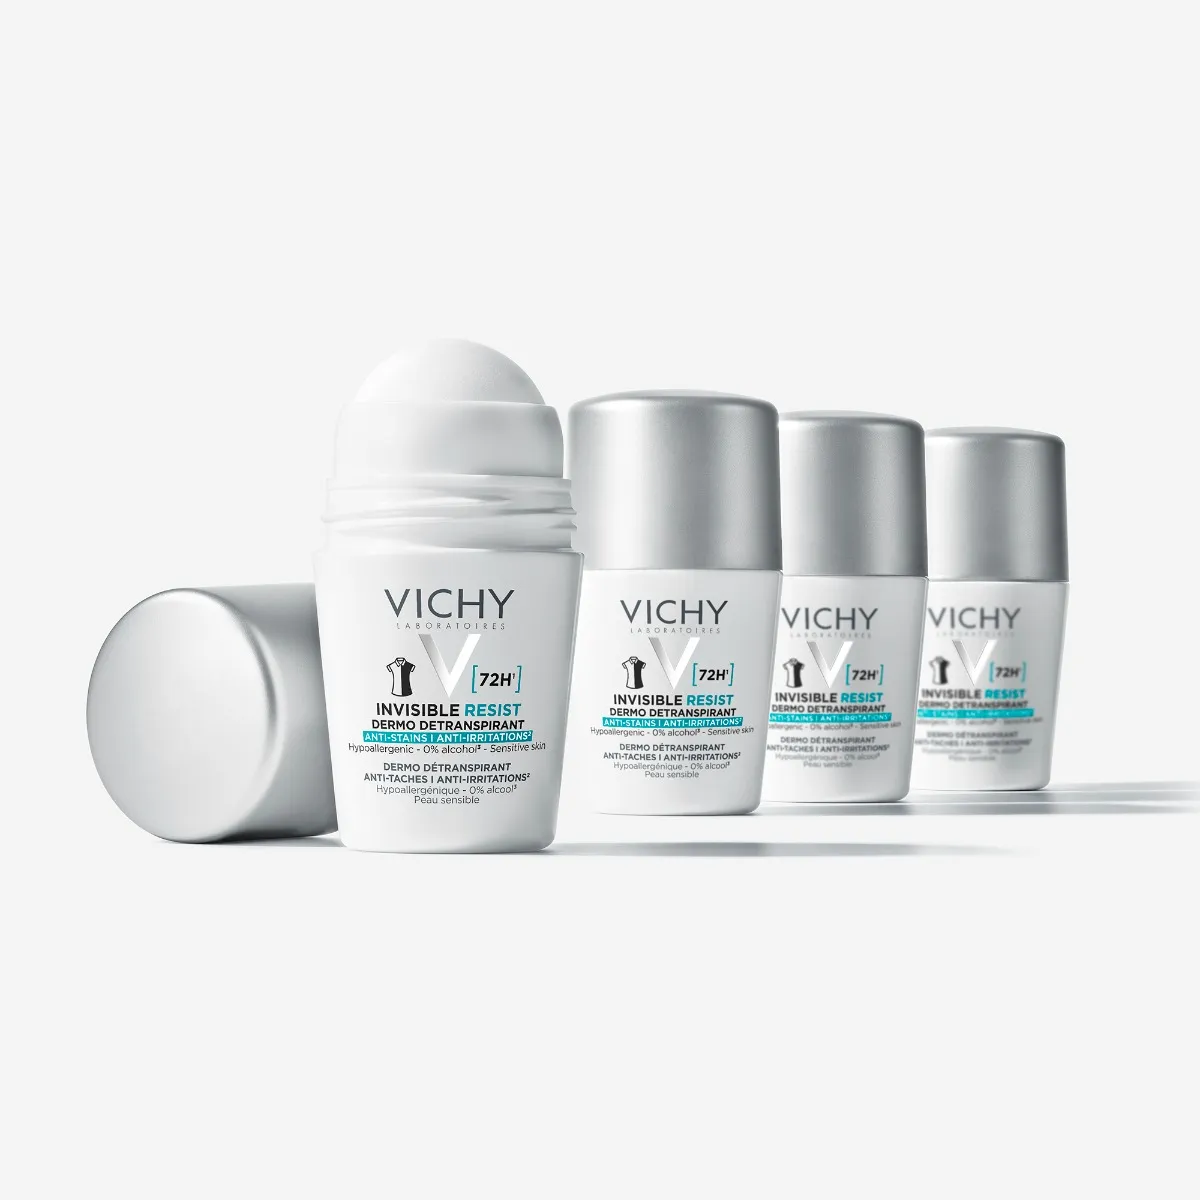 Vichy Invisible Resist 72h Antiperspirant roll-on 50 ml